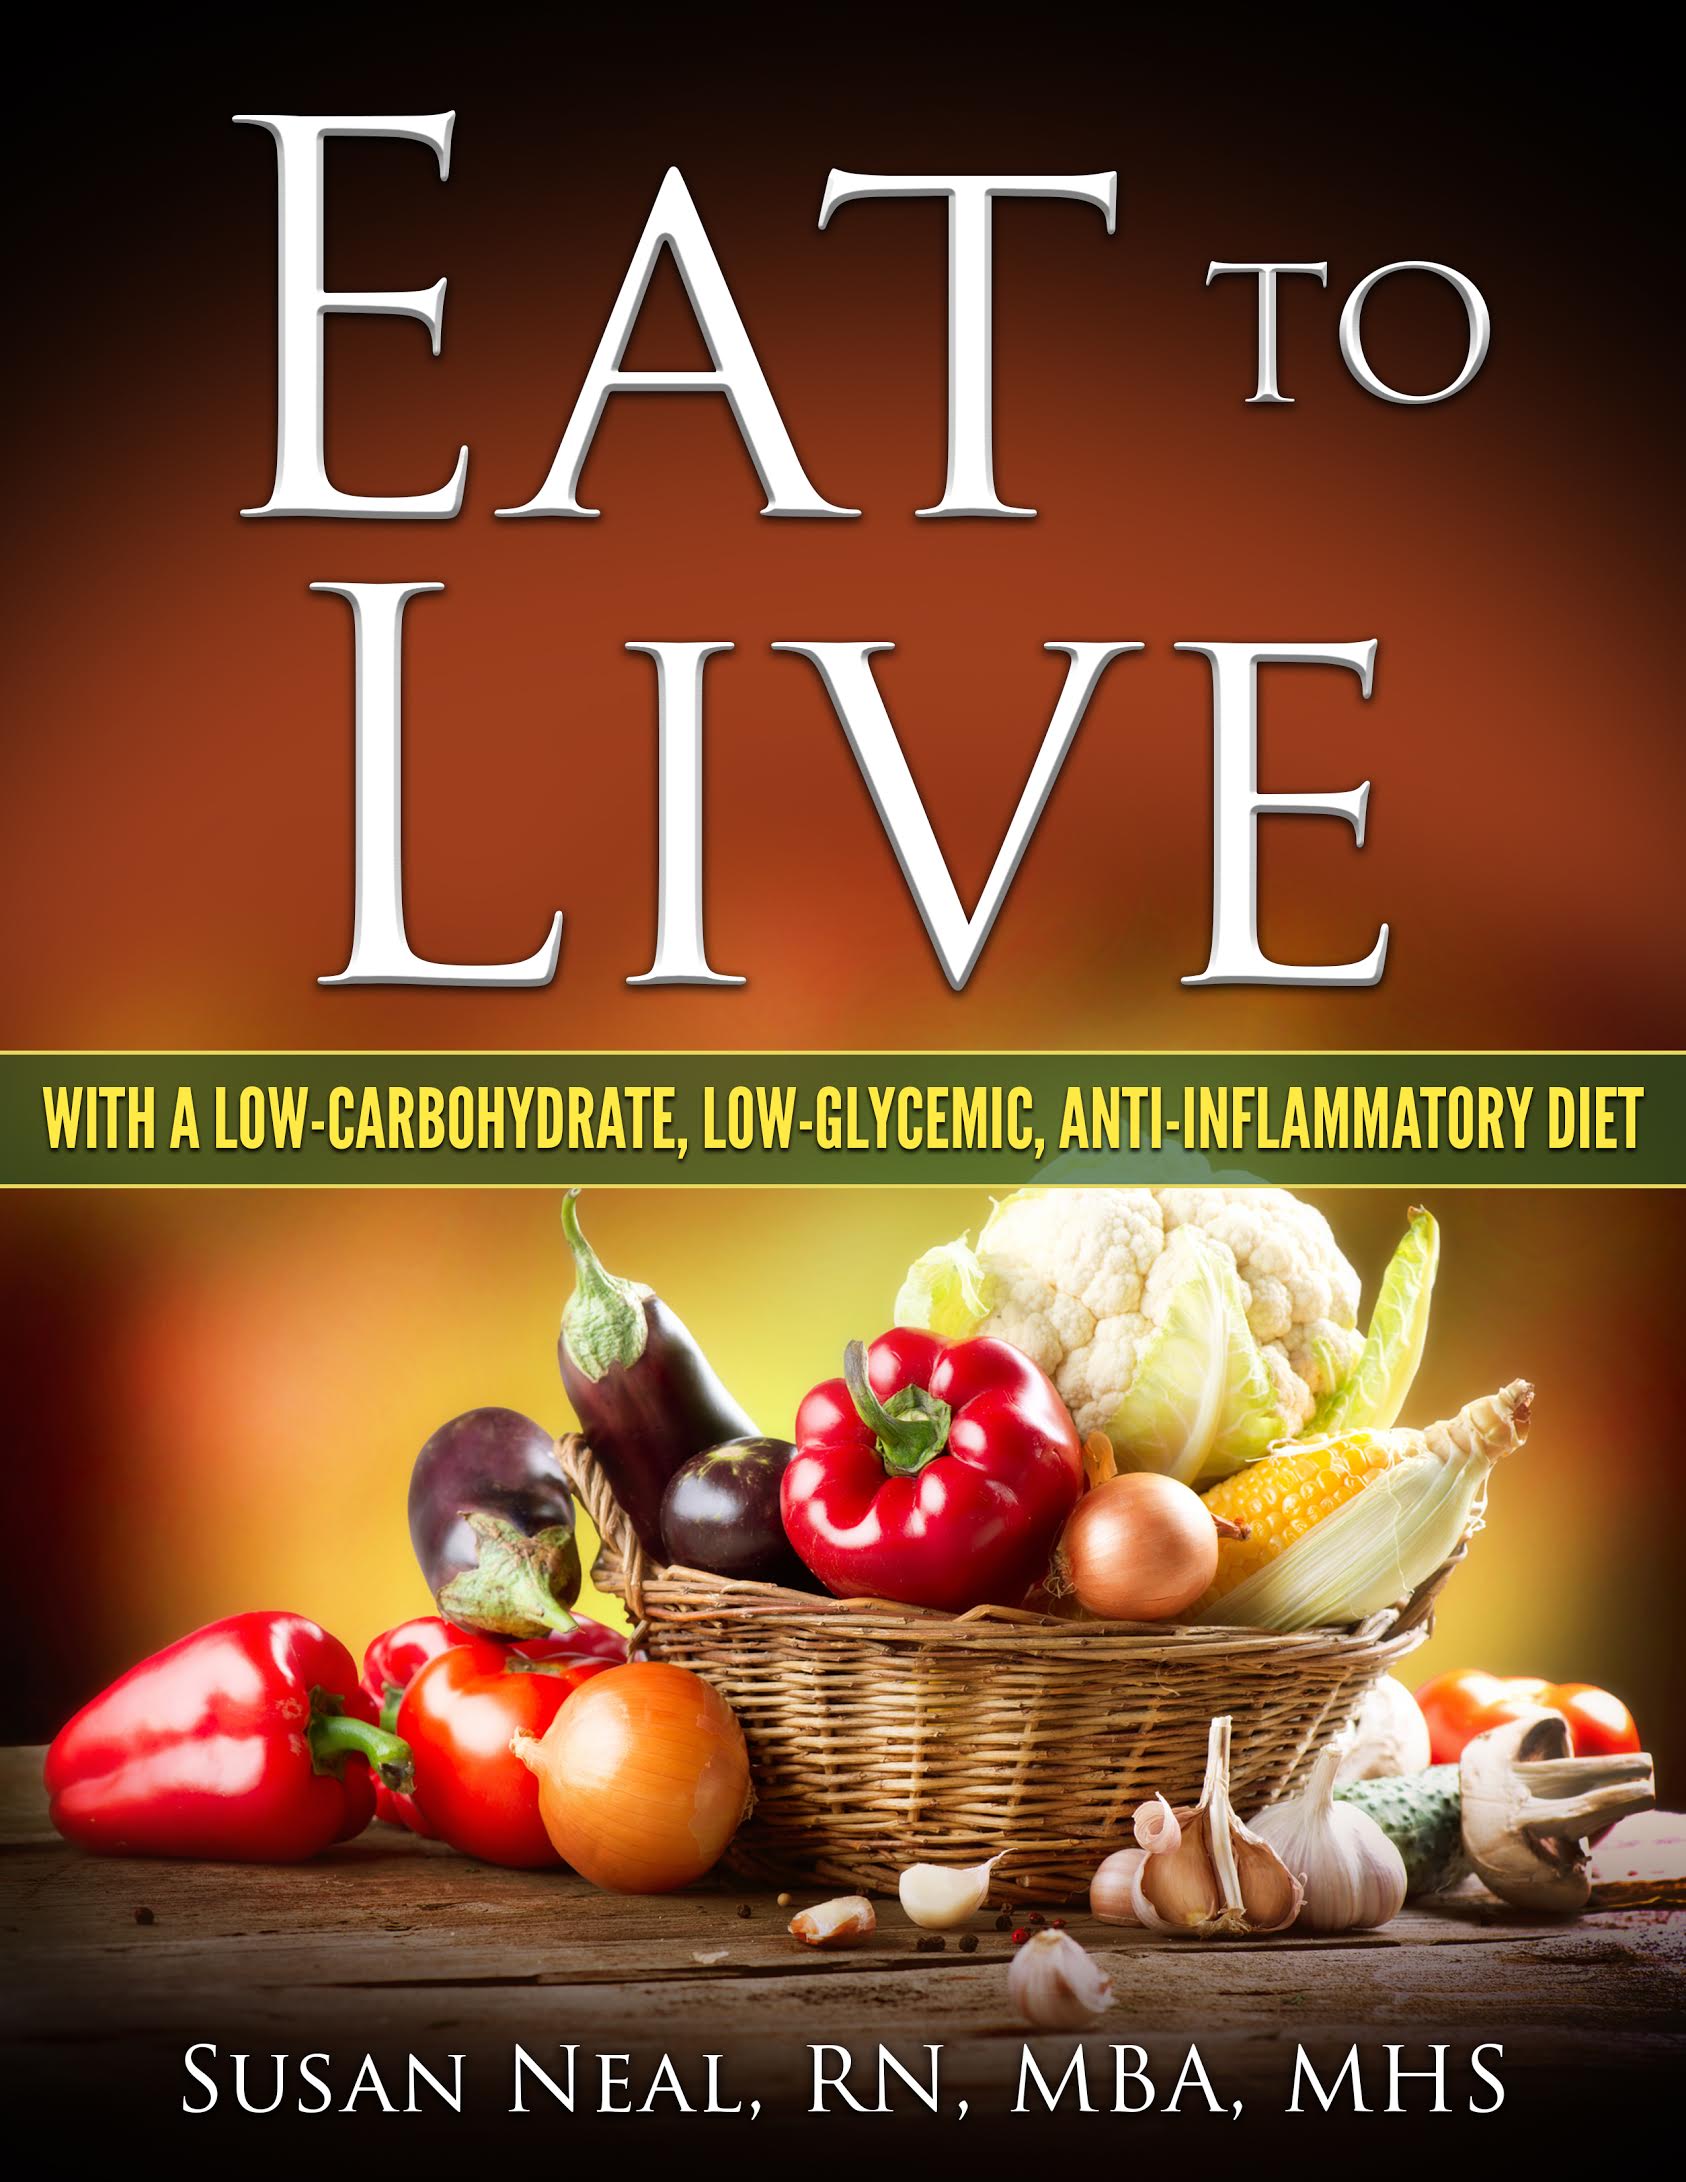 EAT TO LIVE: with a Low-Carbohydrate, Low-Glycemic, Anti-Inflammatory